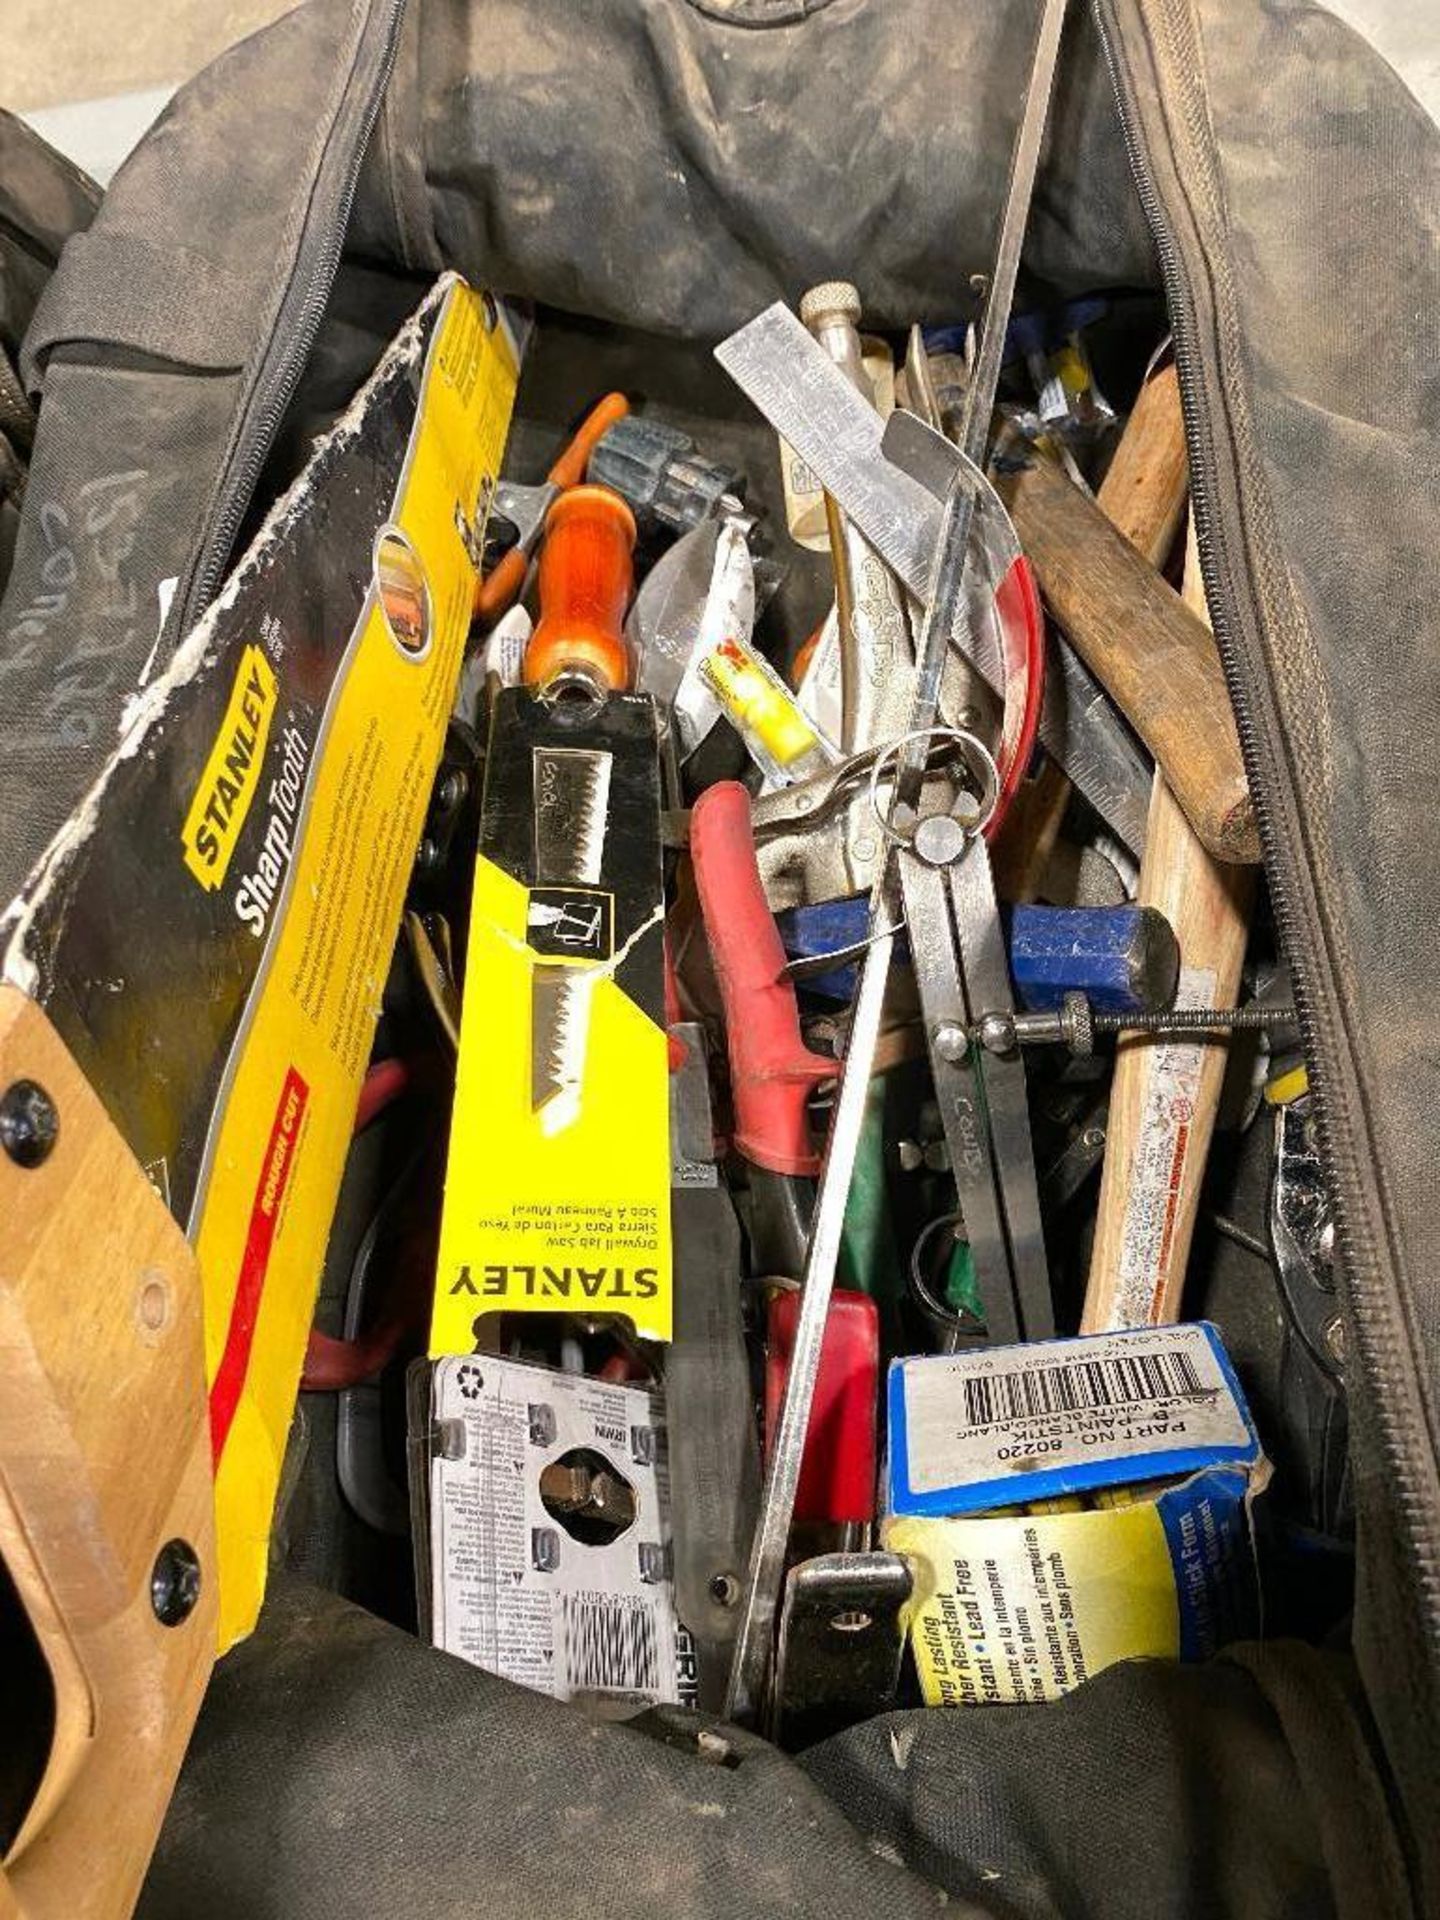 Lot of Asst. Hand Tools including Hammer, Saw, Snips, Vise Grips, Clamps, etc. - Image 5 of 6